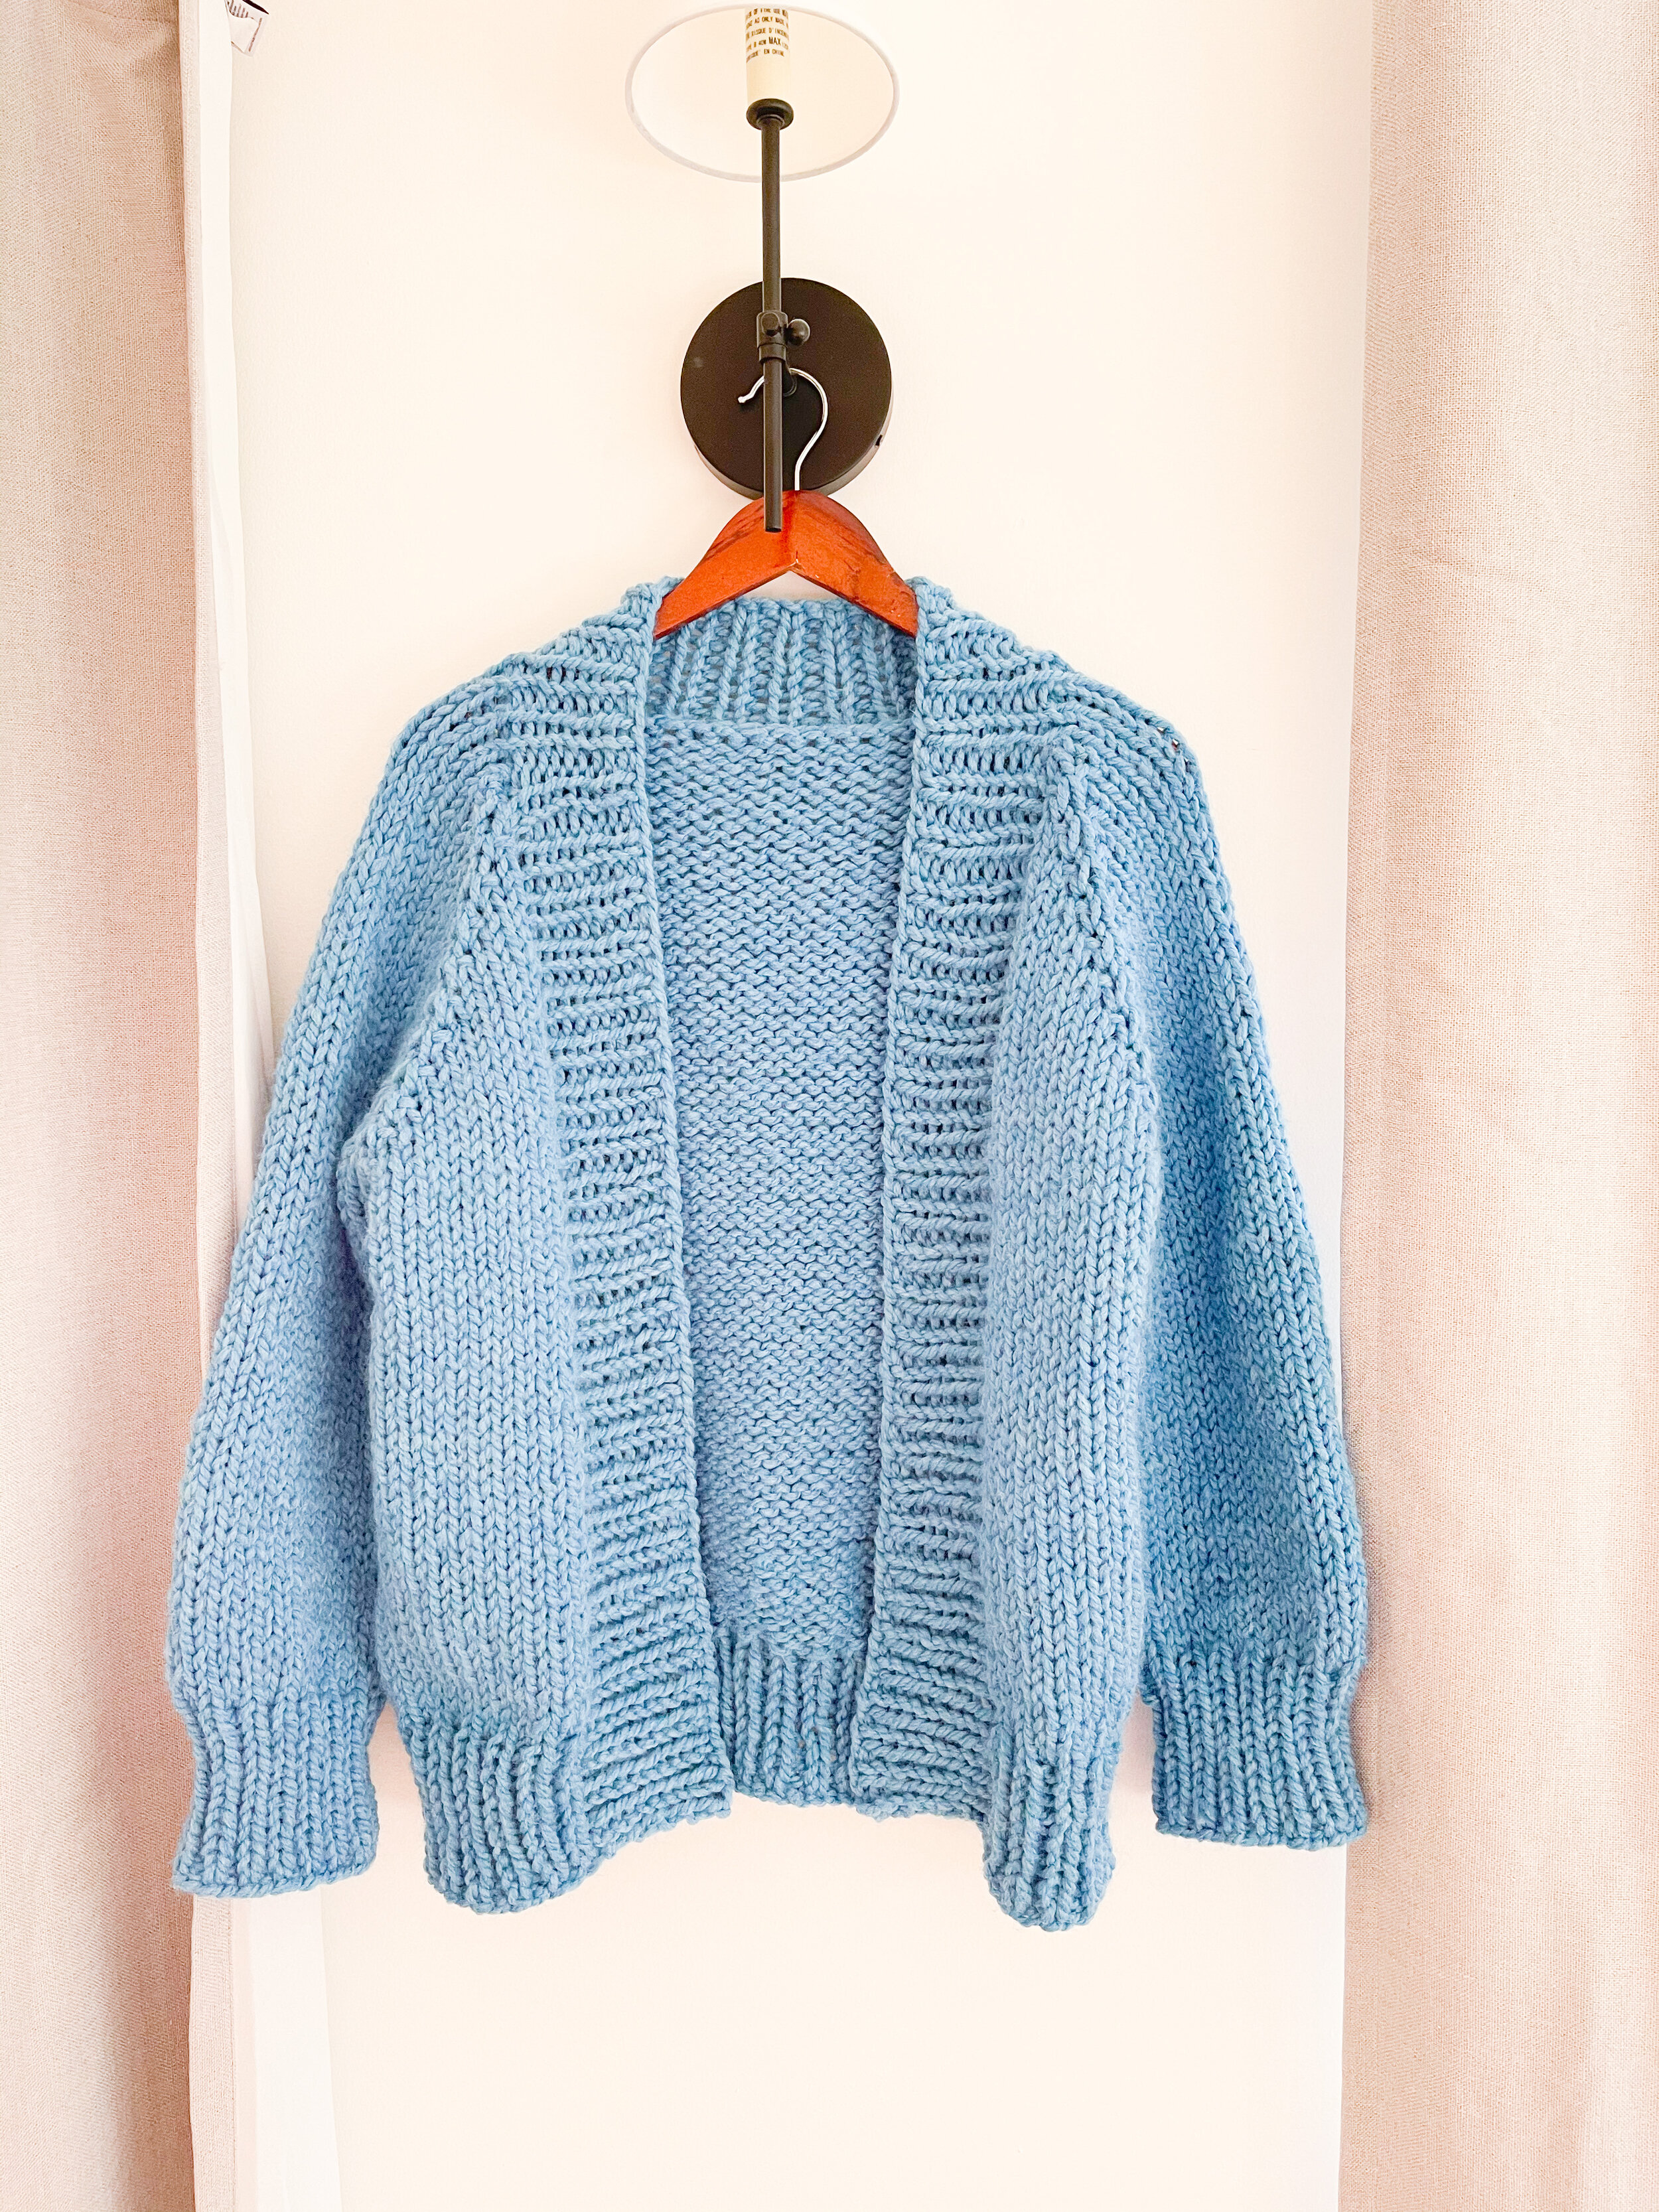 How To Finish A Knitted Cardigan?